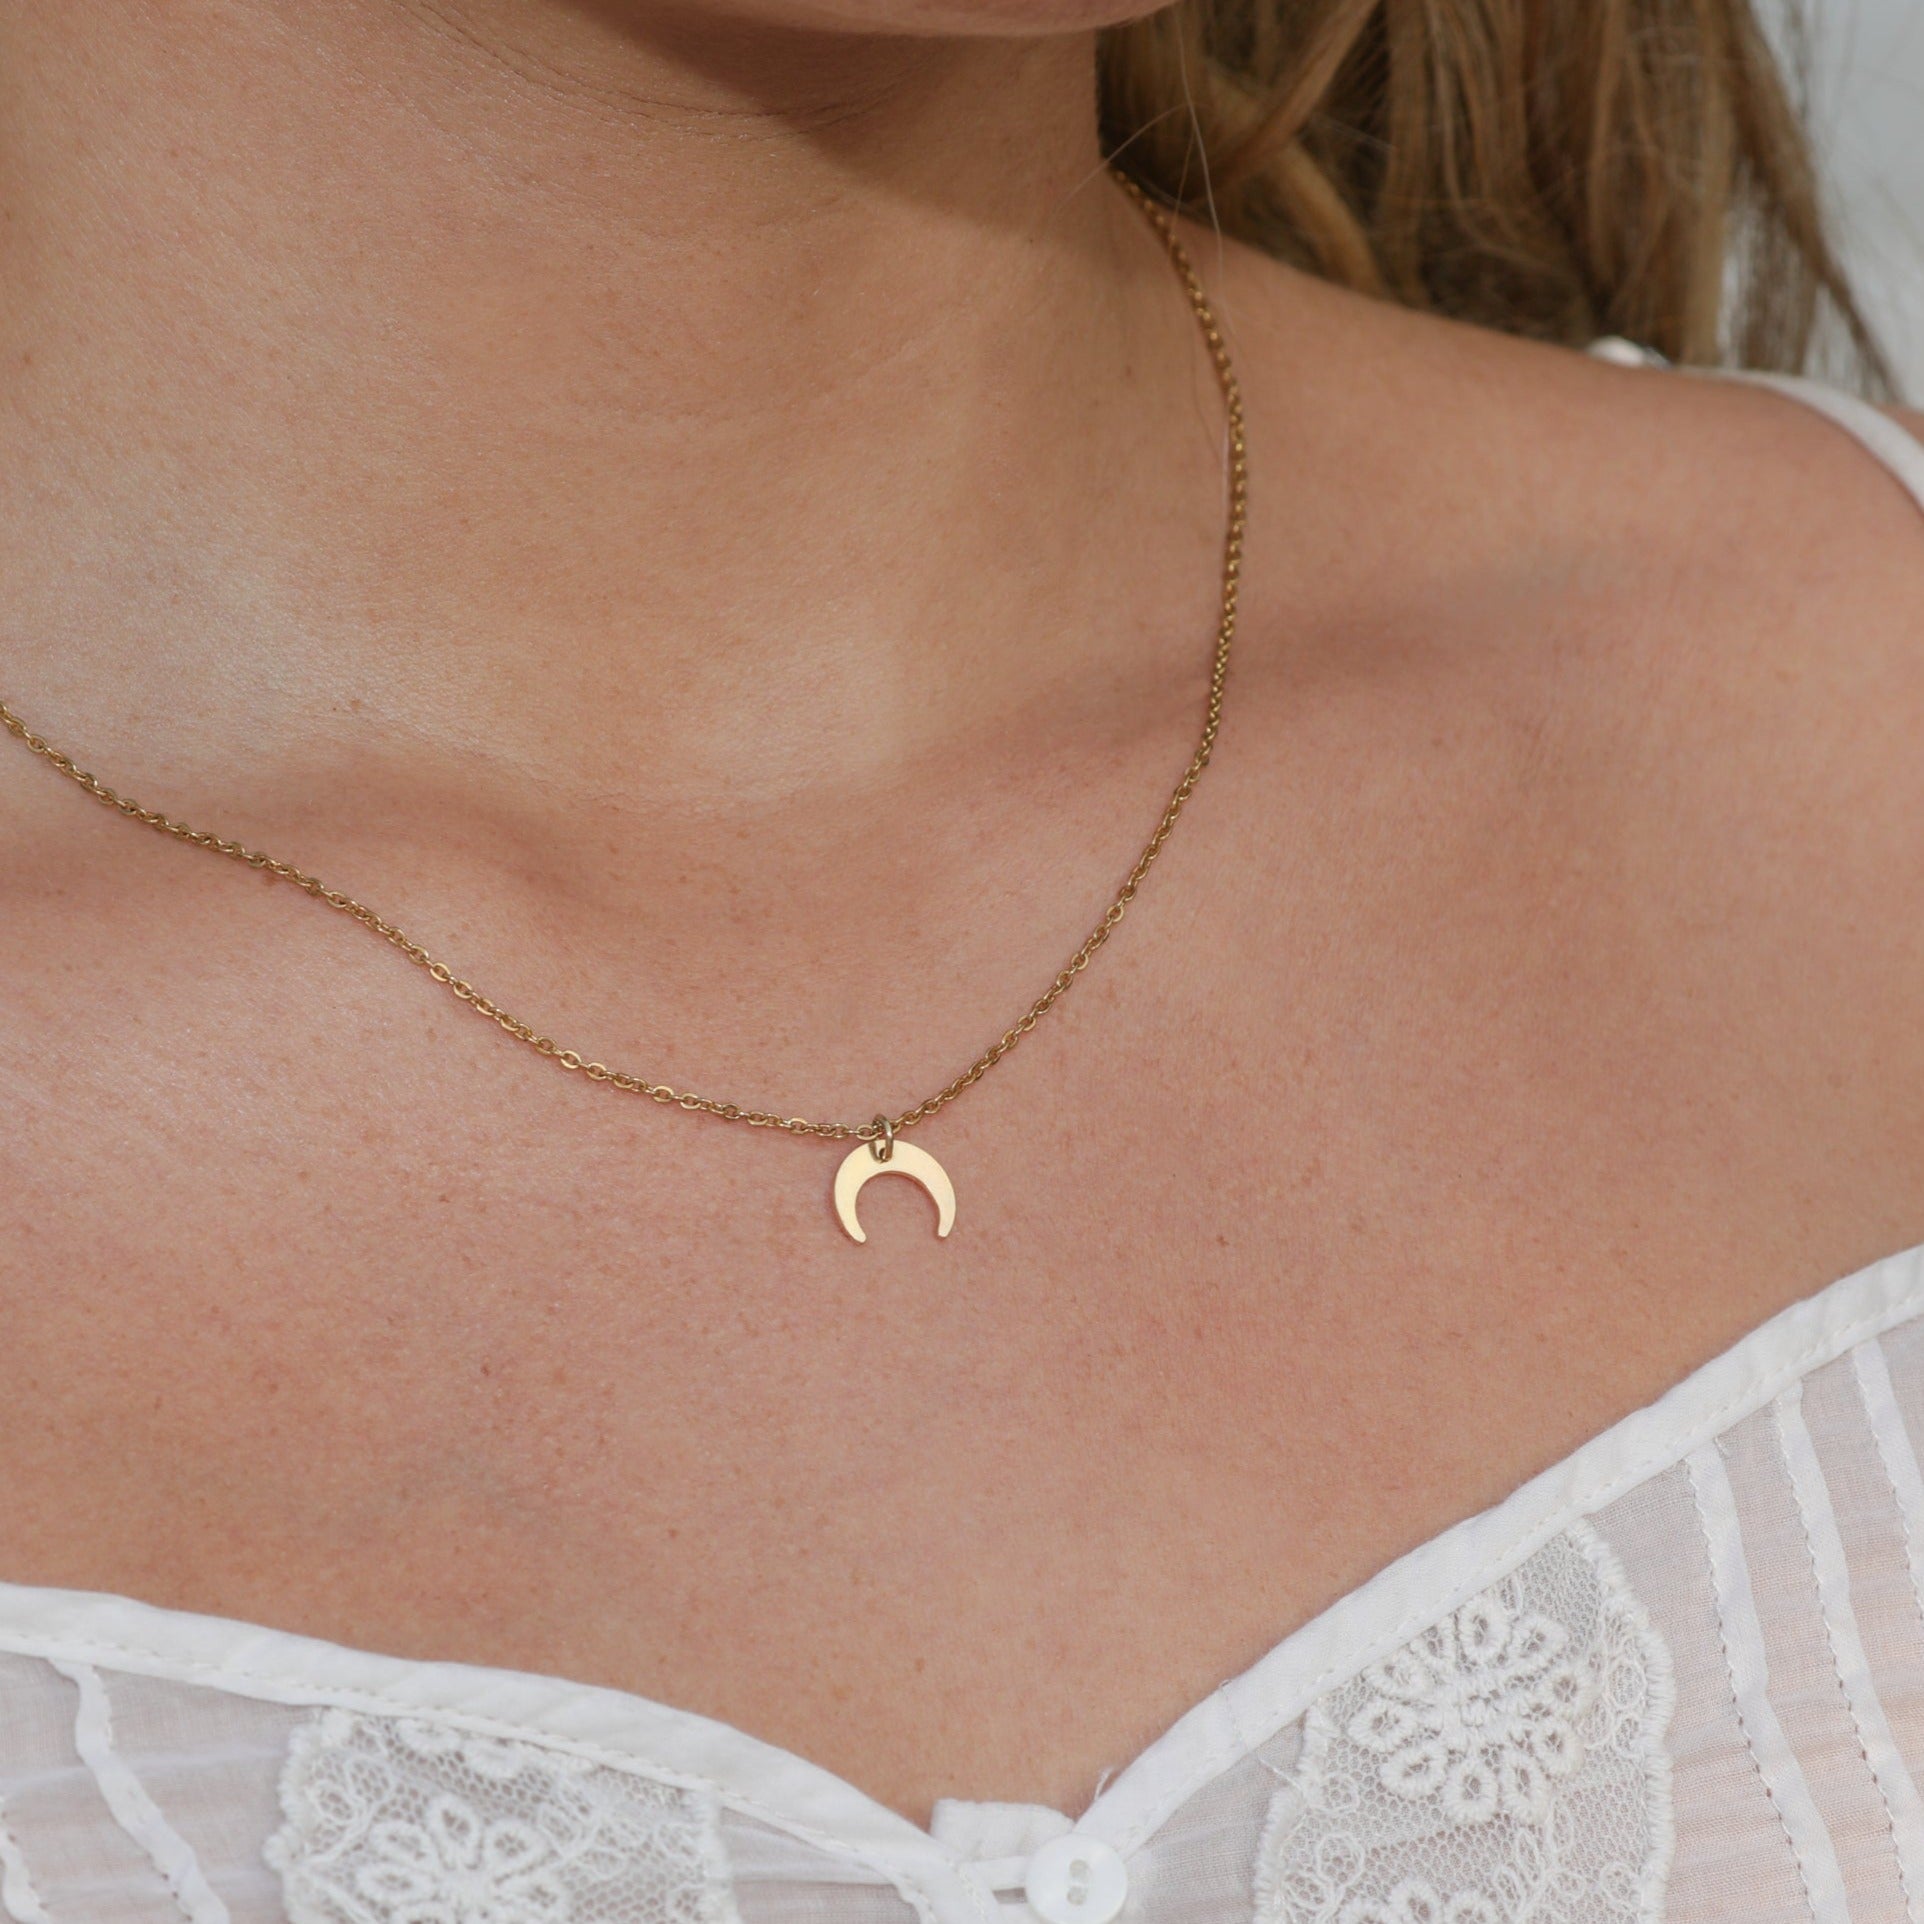 Gold Moon Phase Black Lace Choker - Lunar Cycle Necklace